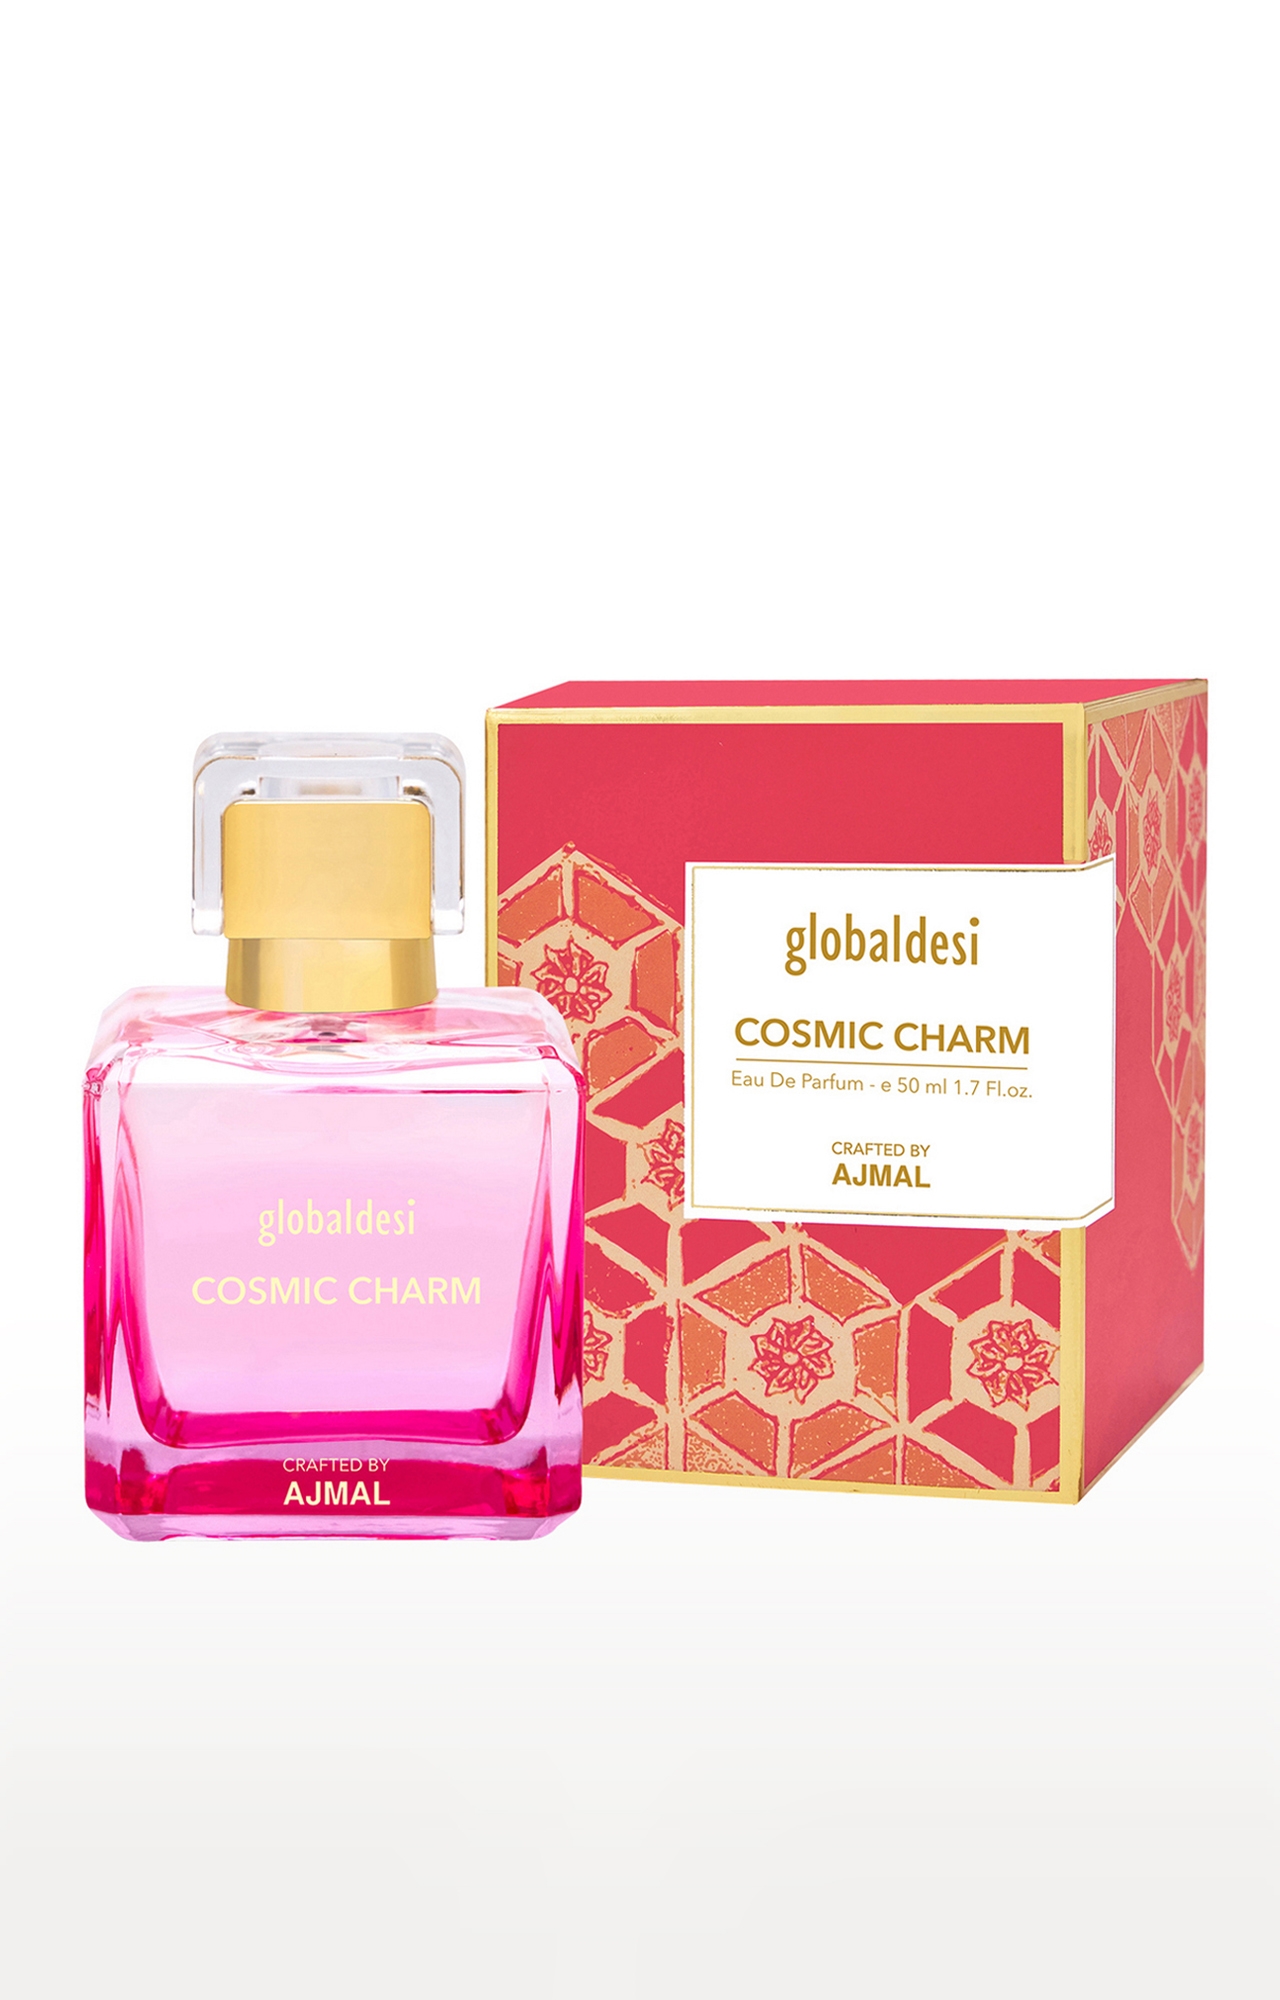 Global Desi Crafted By Ajmal | Global Desi Cosmic Charm Eau De Parfum 50ML Long Lasting Scent Spray Gift For Women Crafted By Ajmal